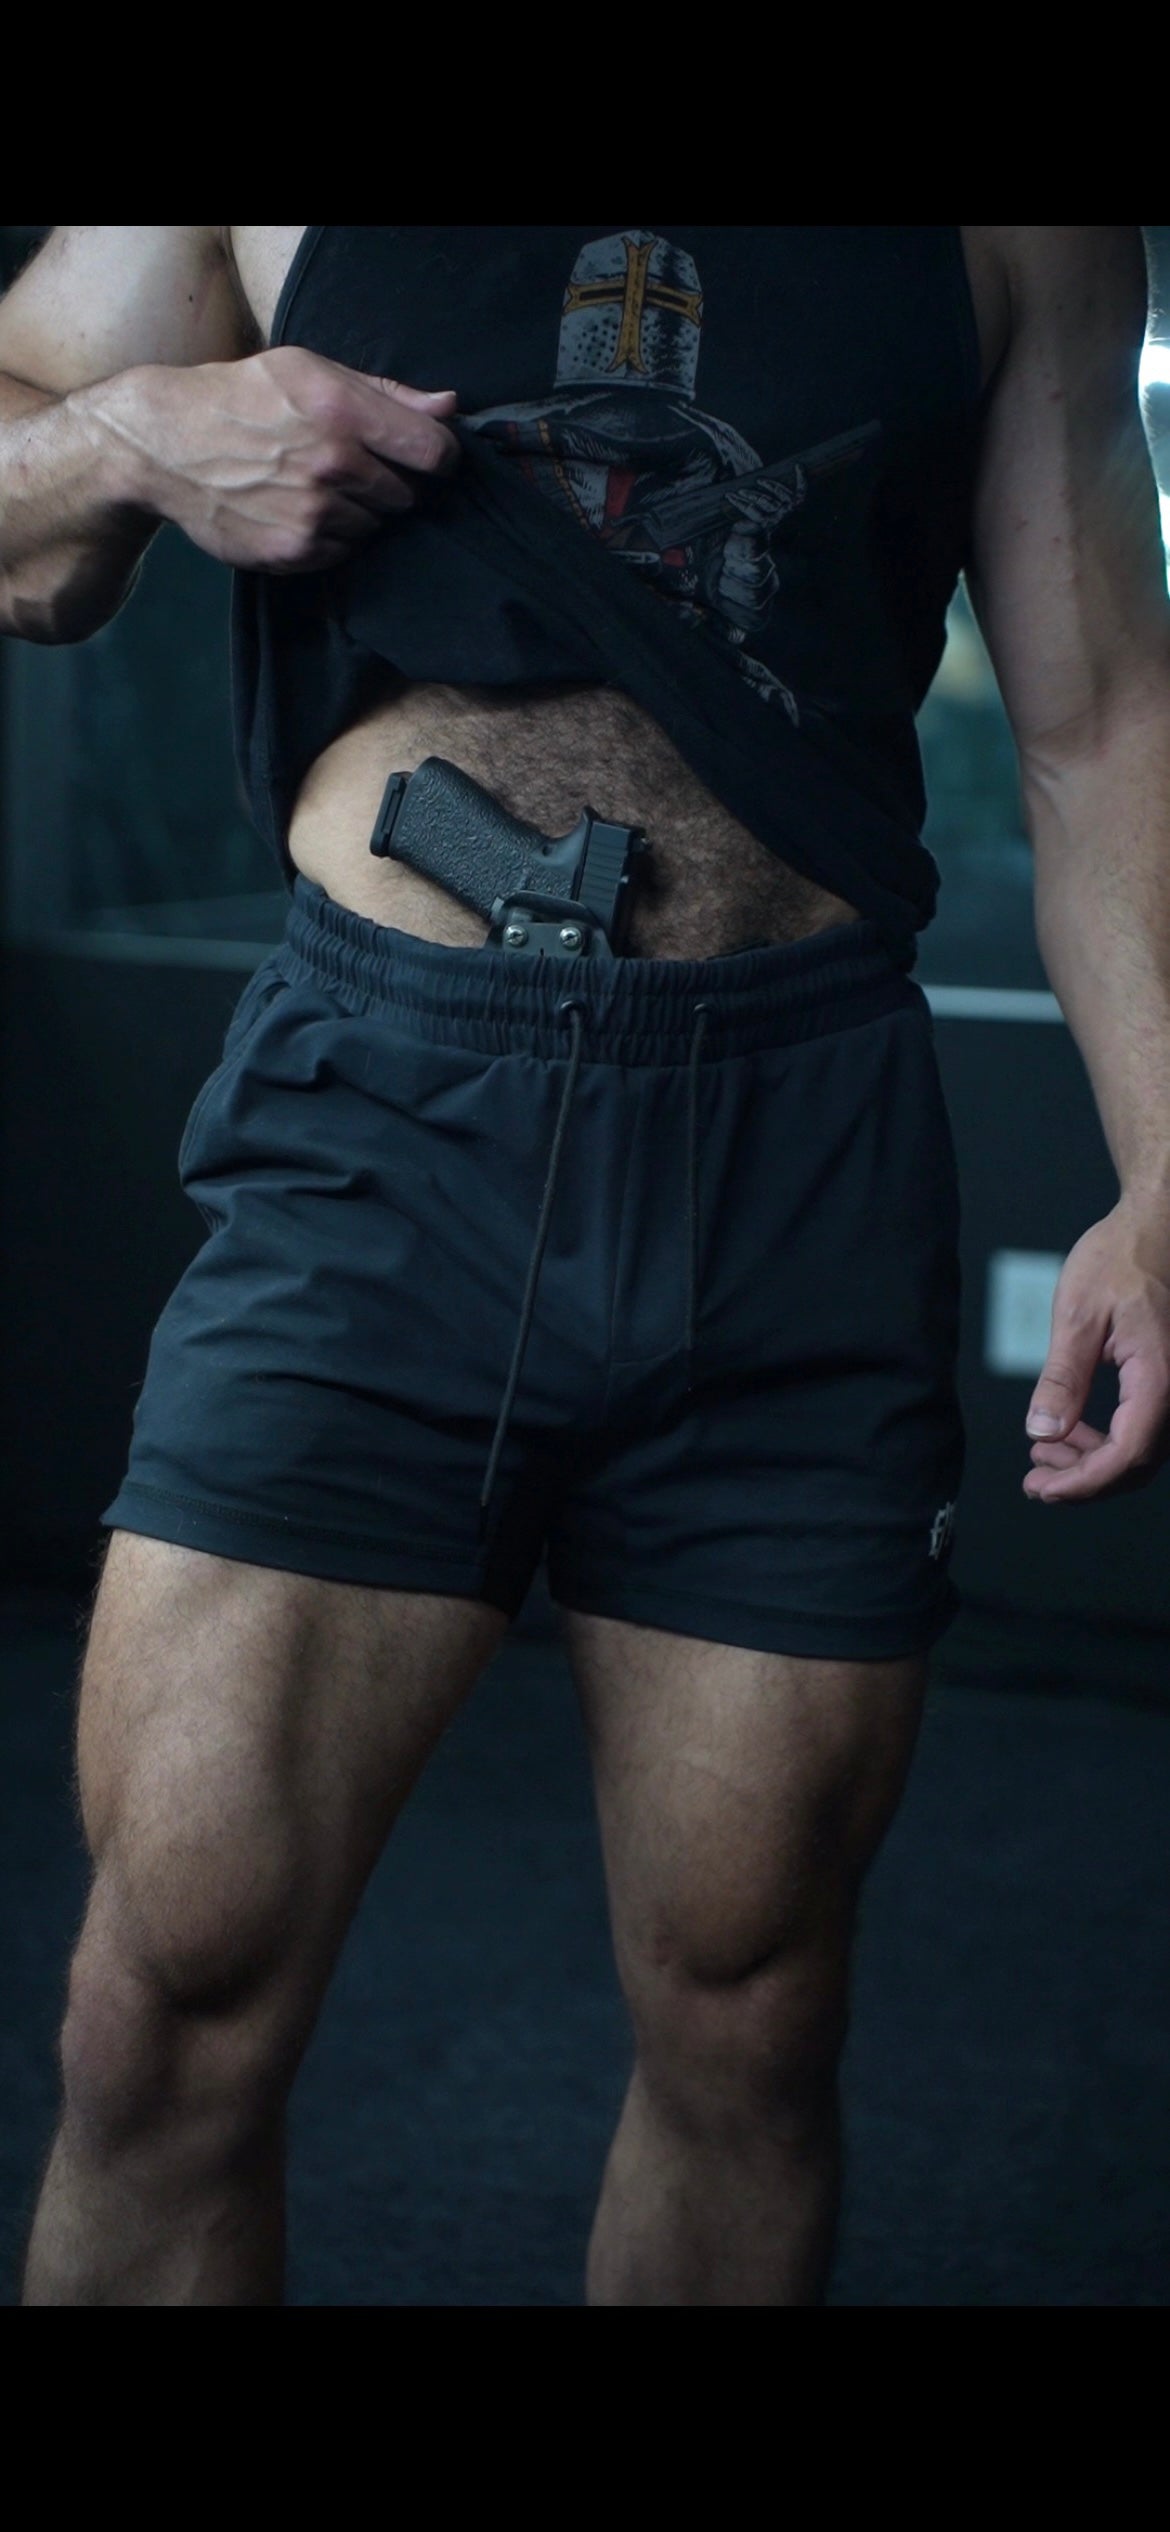 Concealed Carry Shorts - 5"